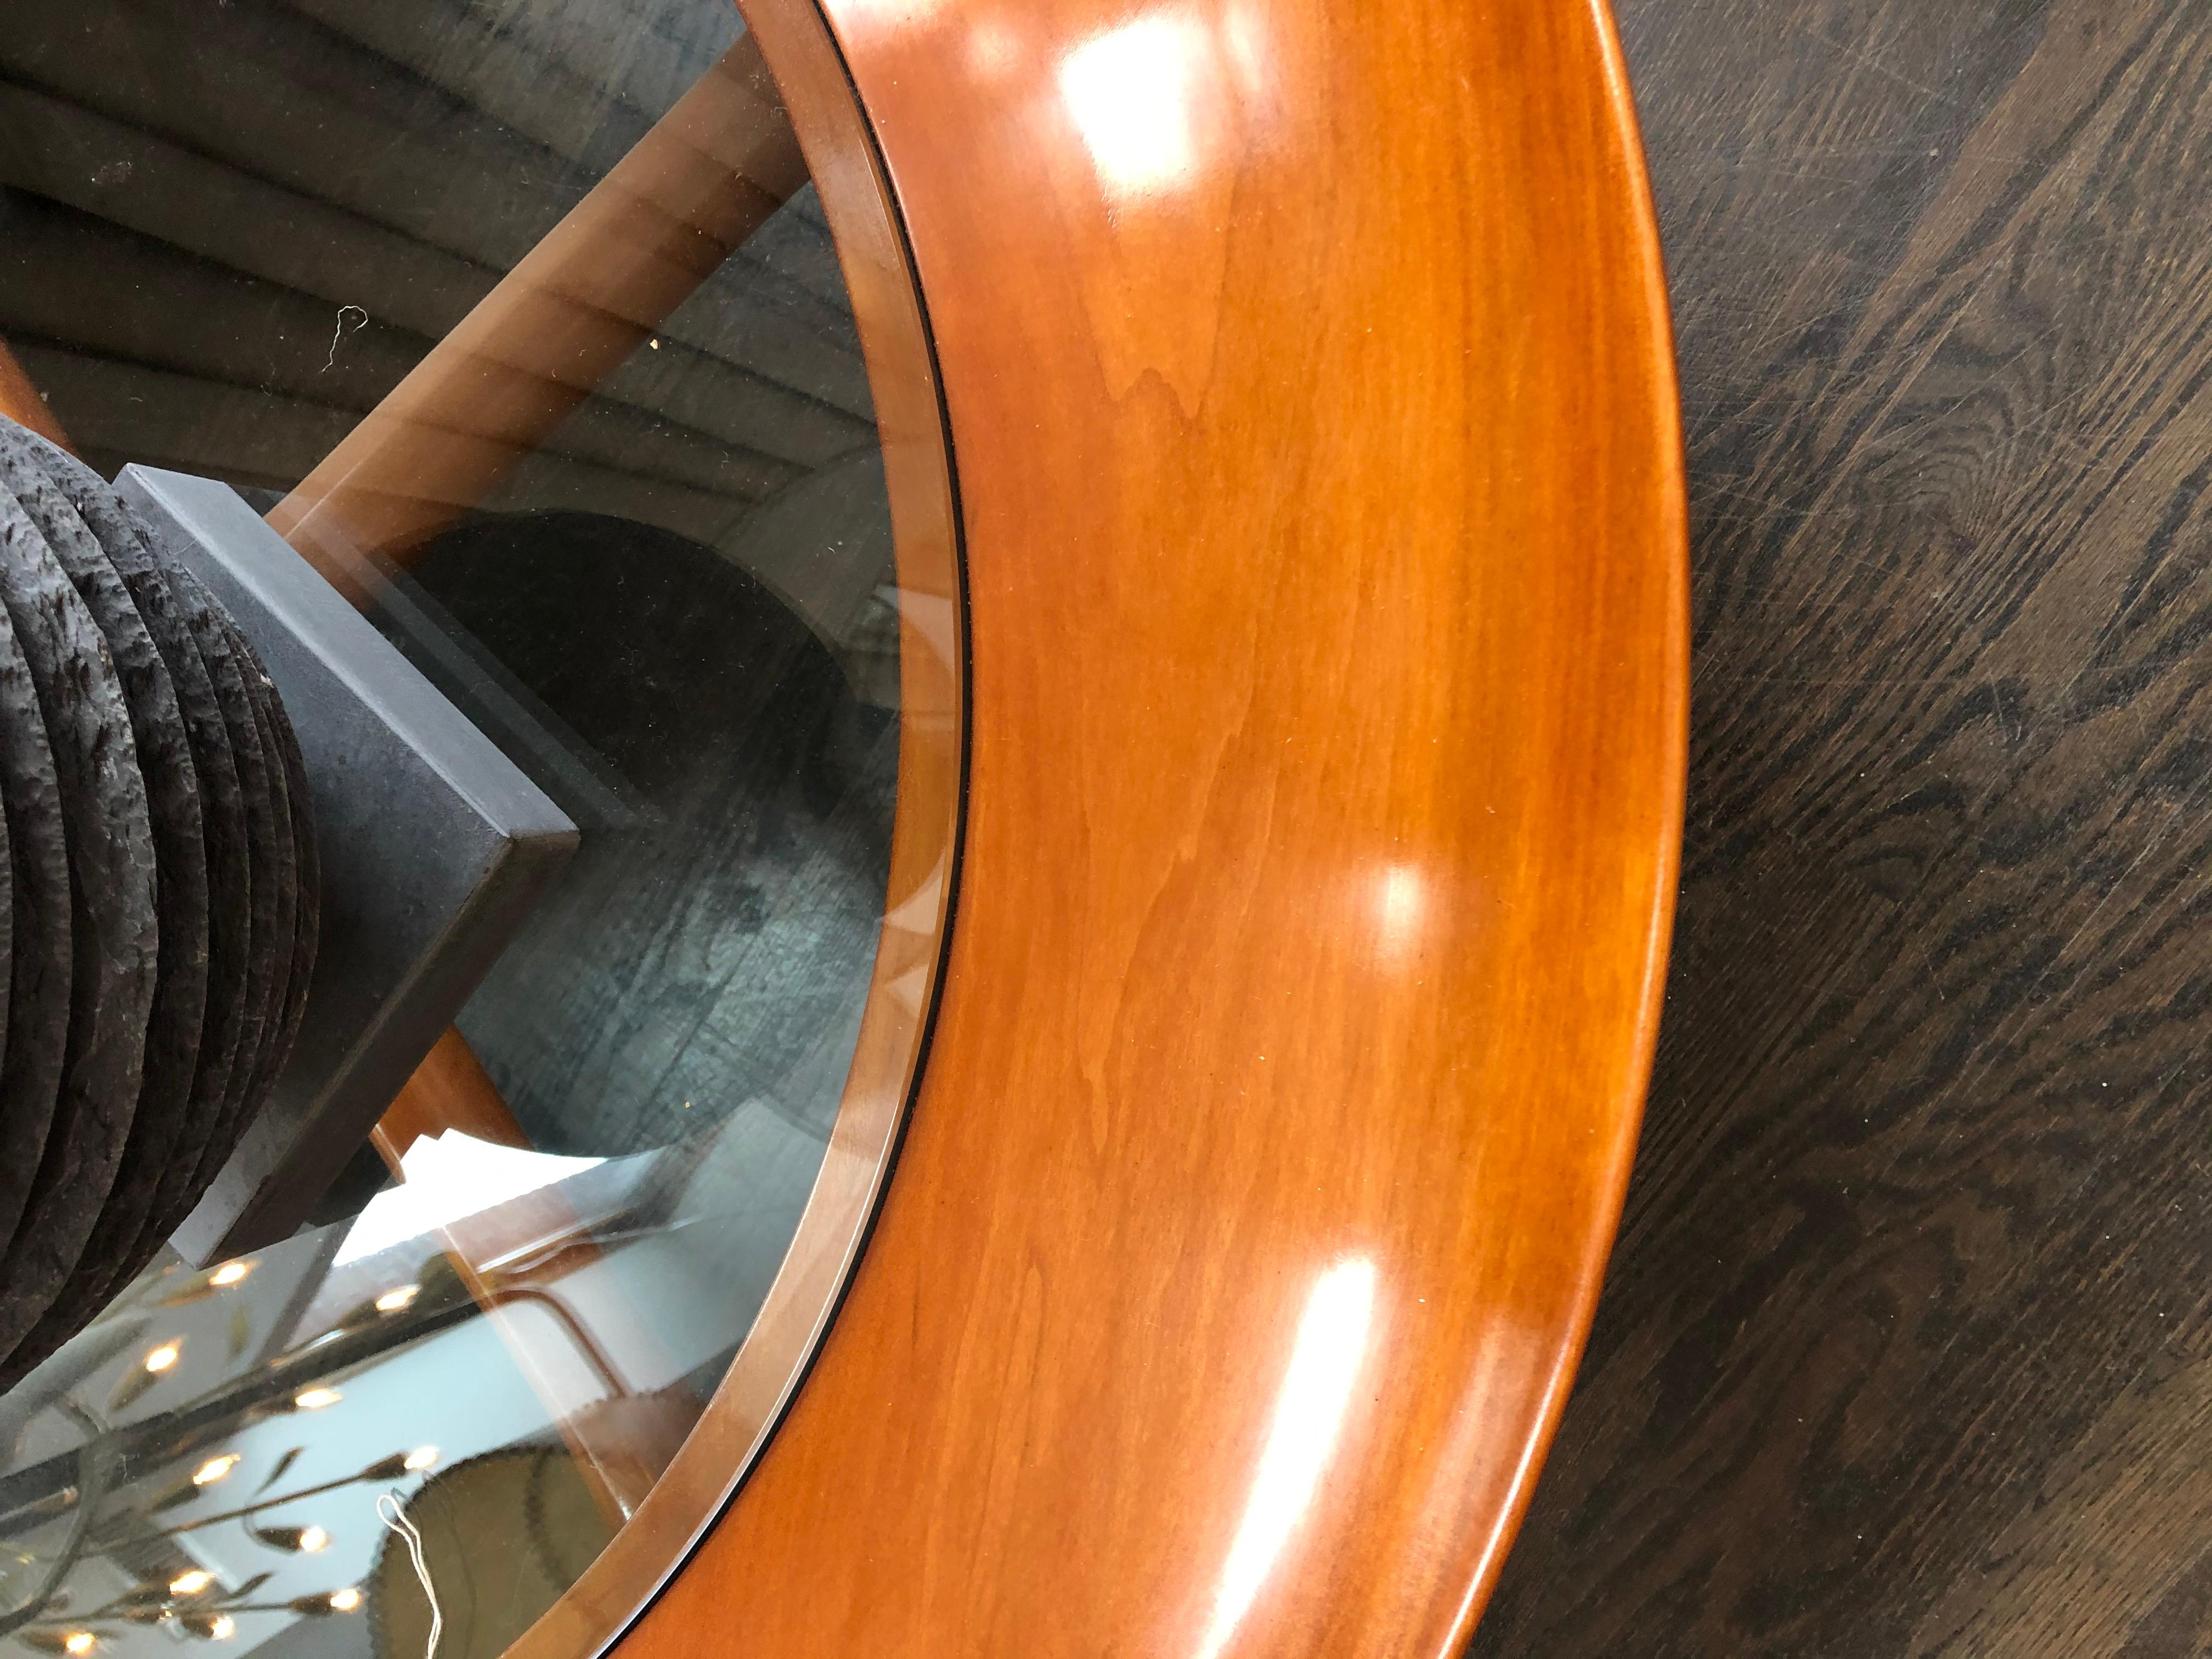 Italian Walnut Custom Round Coffee Table In Excellent Condition For Sale In Sag Harbor, NY